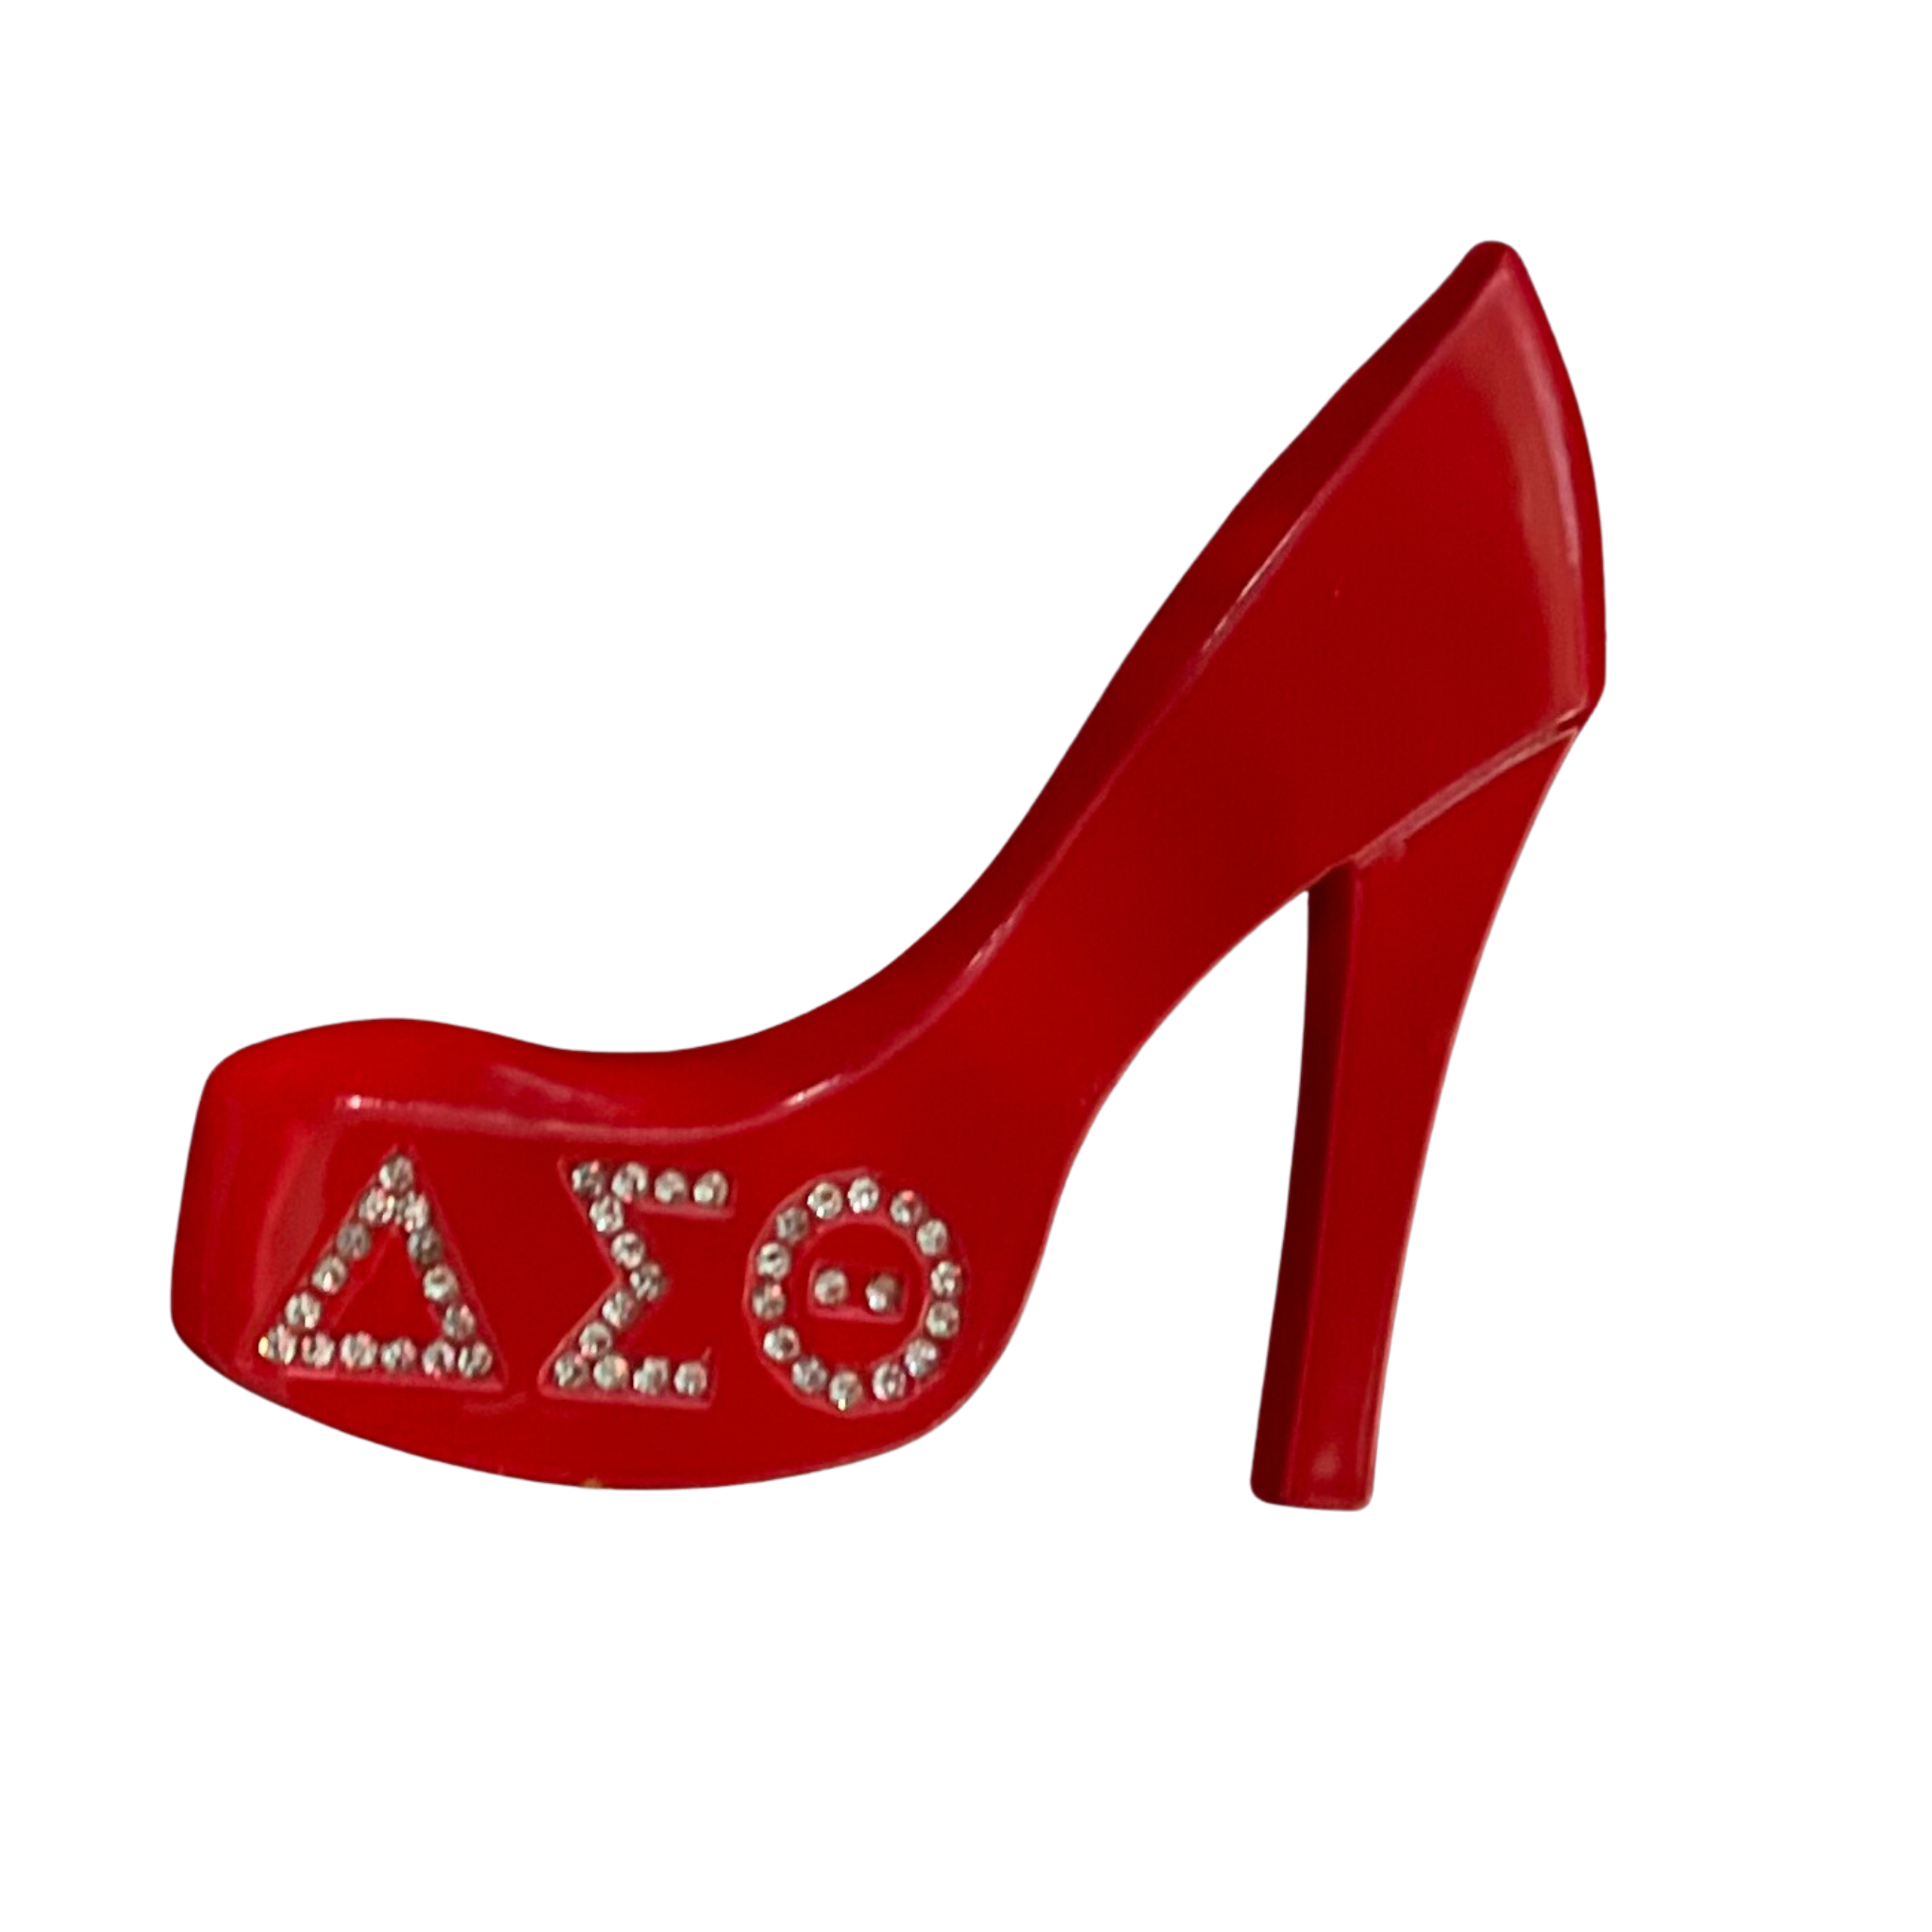 Beautiful Red Shoe with DST Greek Symbols in bling, this Lapel pin is a must have. 